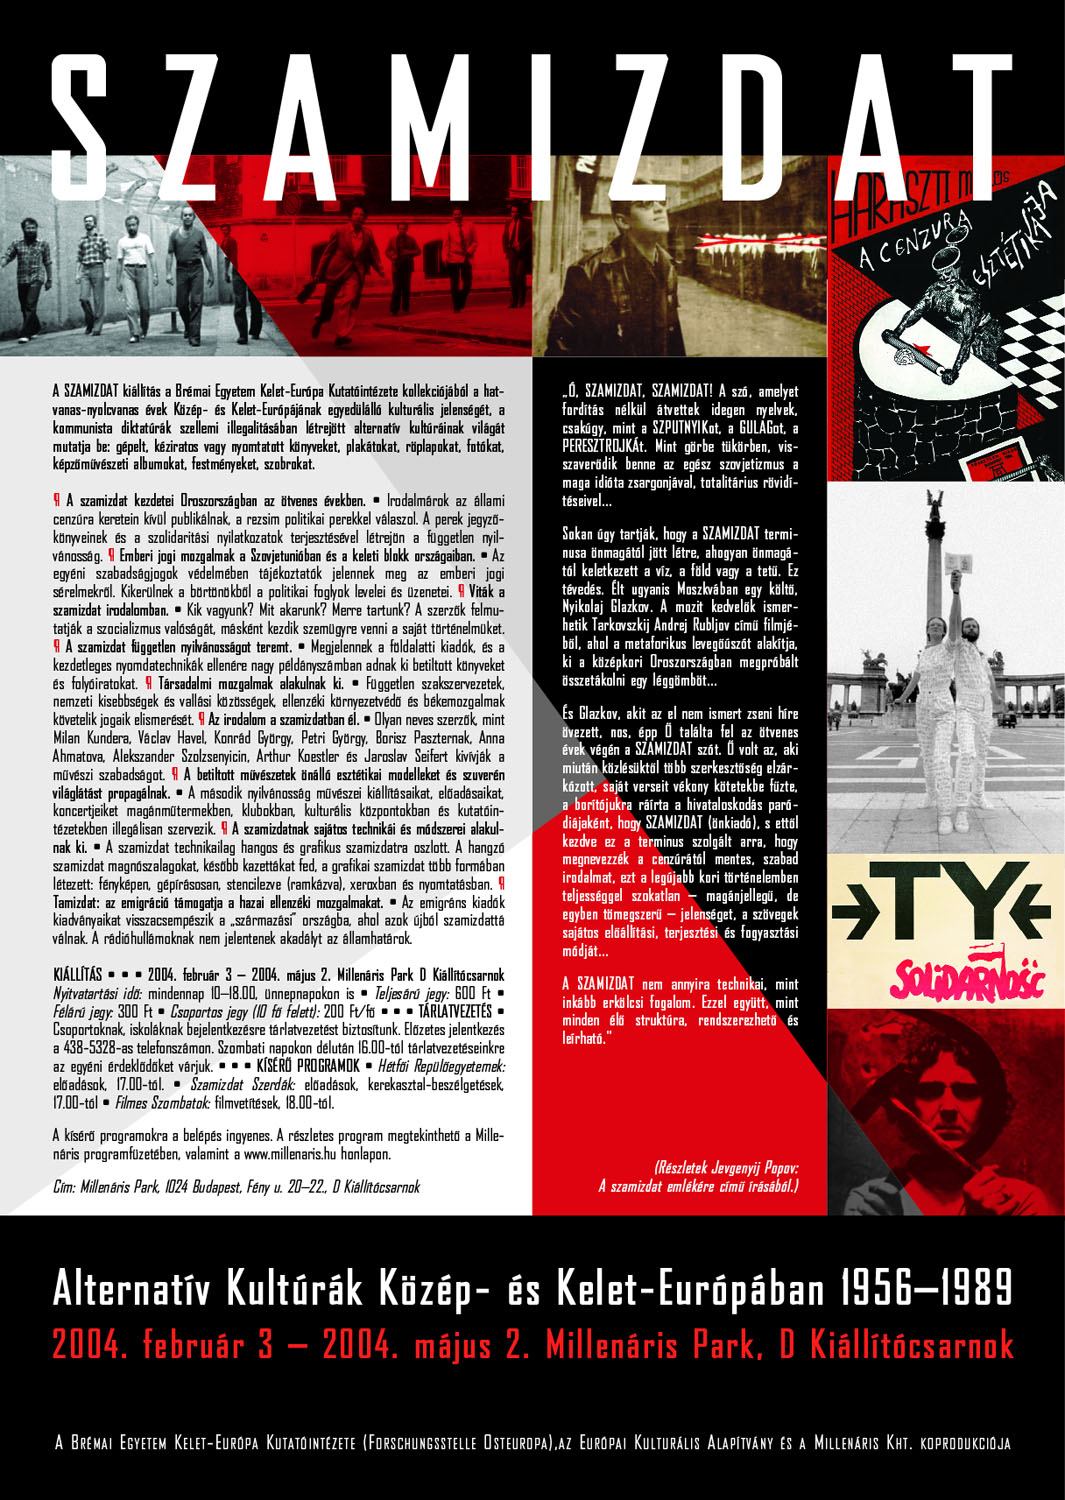 Flyer  for the exhibition Samizdat. Alternative Culture in Central and Eastern Europe from the 1960s to the 1980s., Millenáris Park, Budapest, 2004